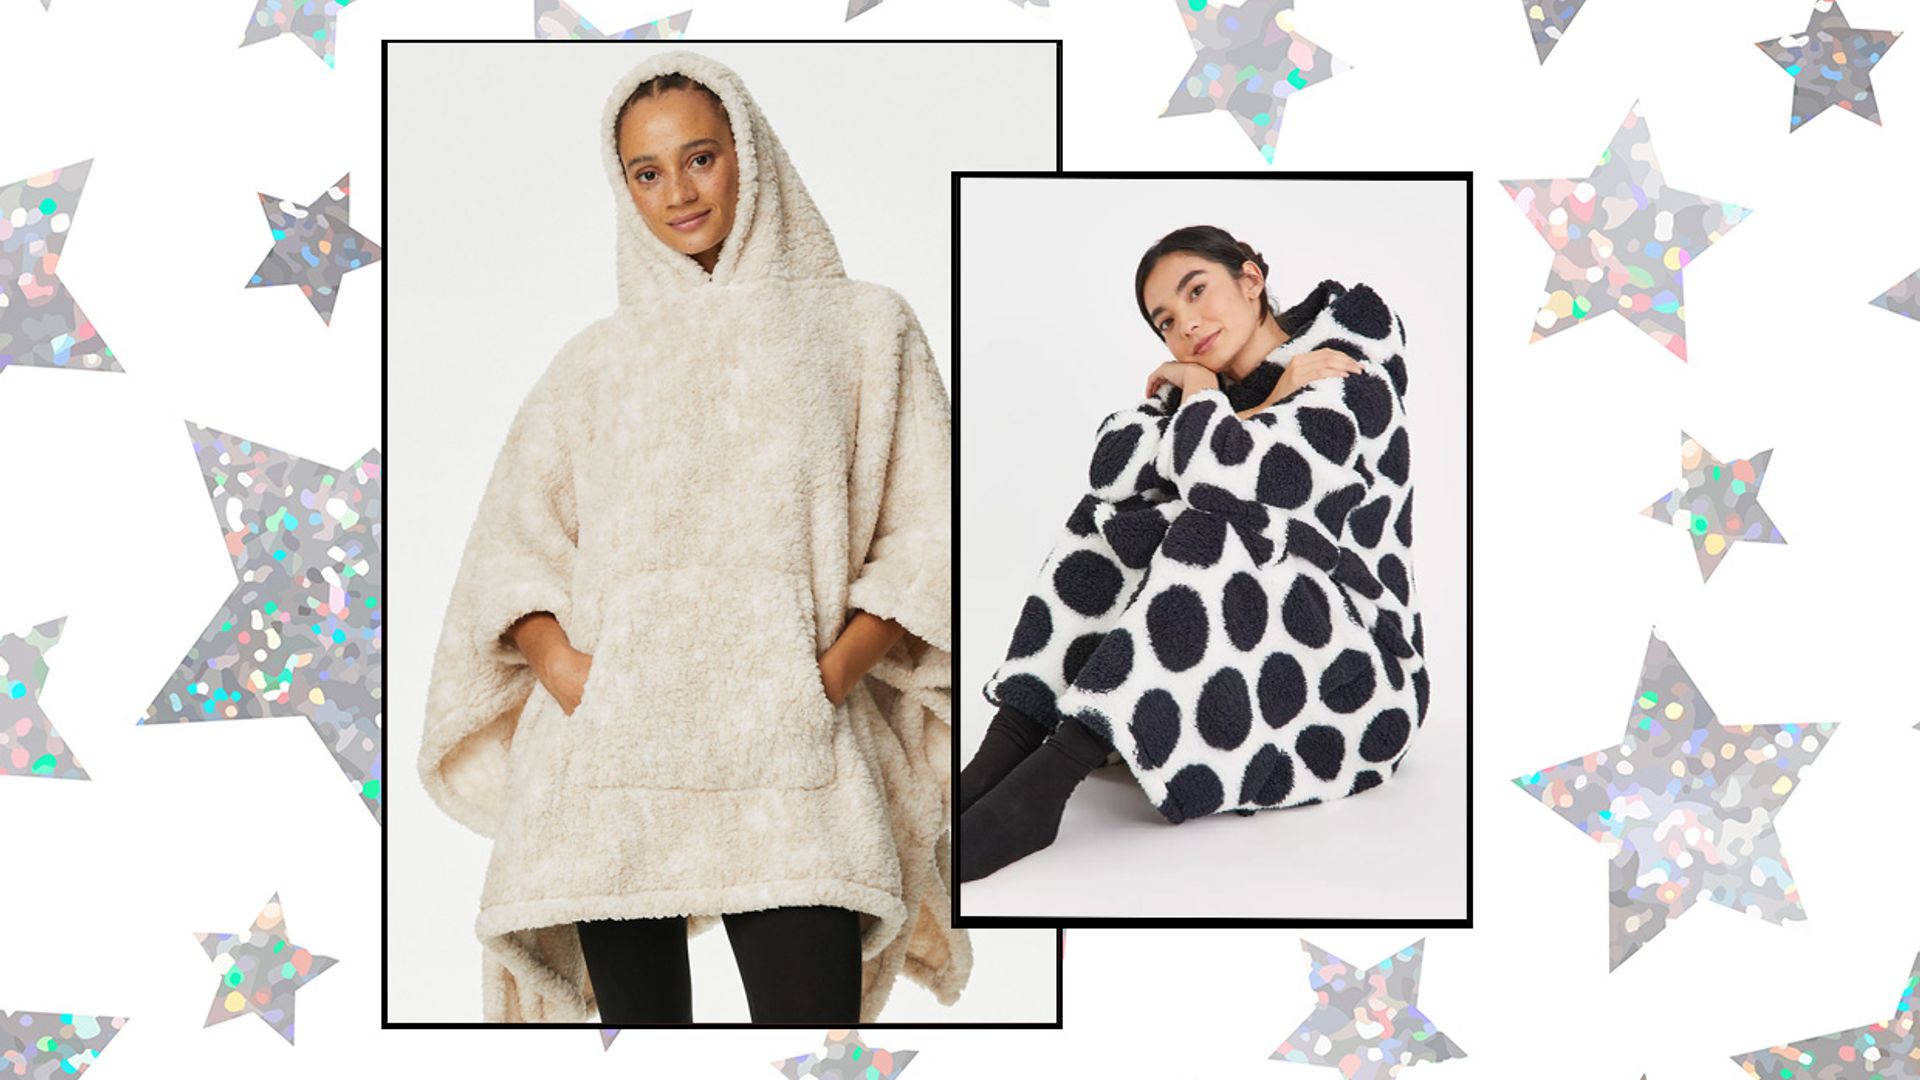 12 Oodie alternatives that are ridiculously affordable and ridiculously warm